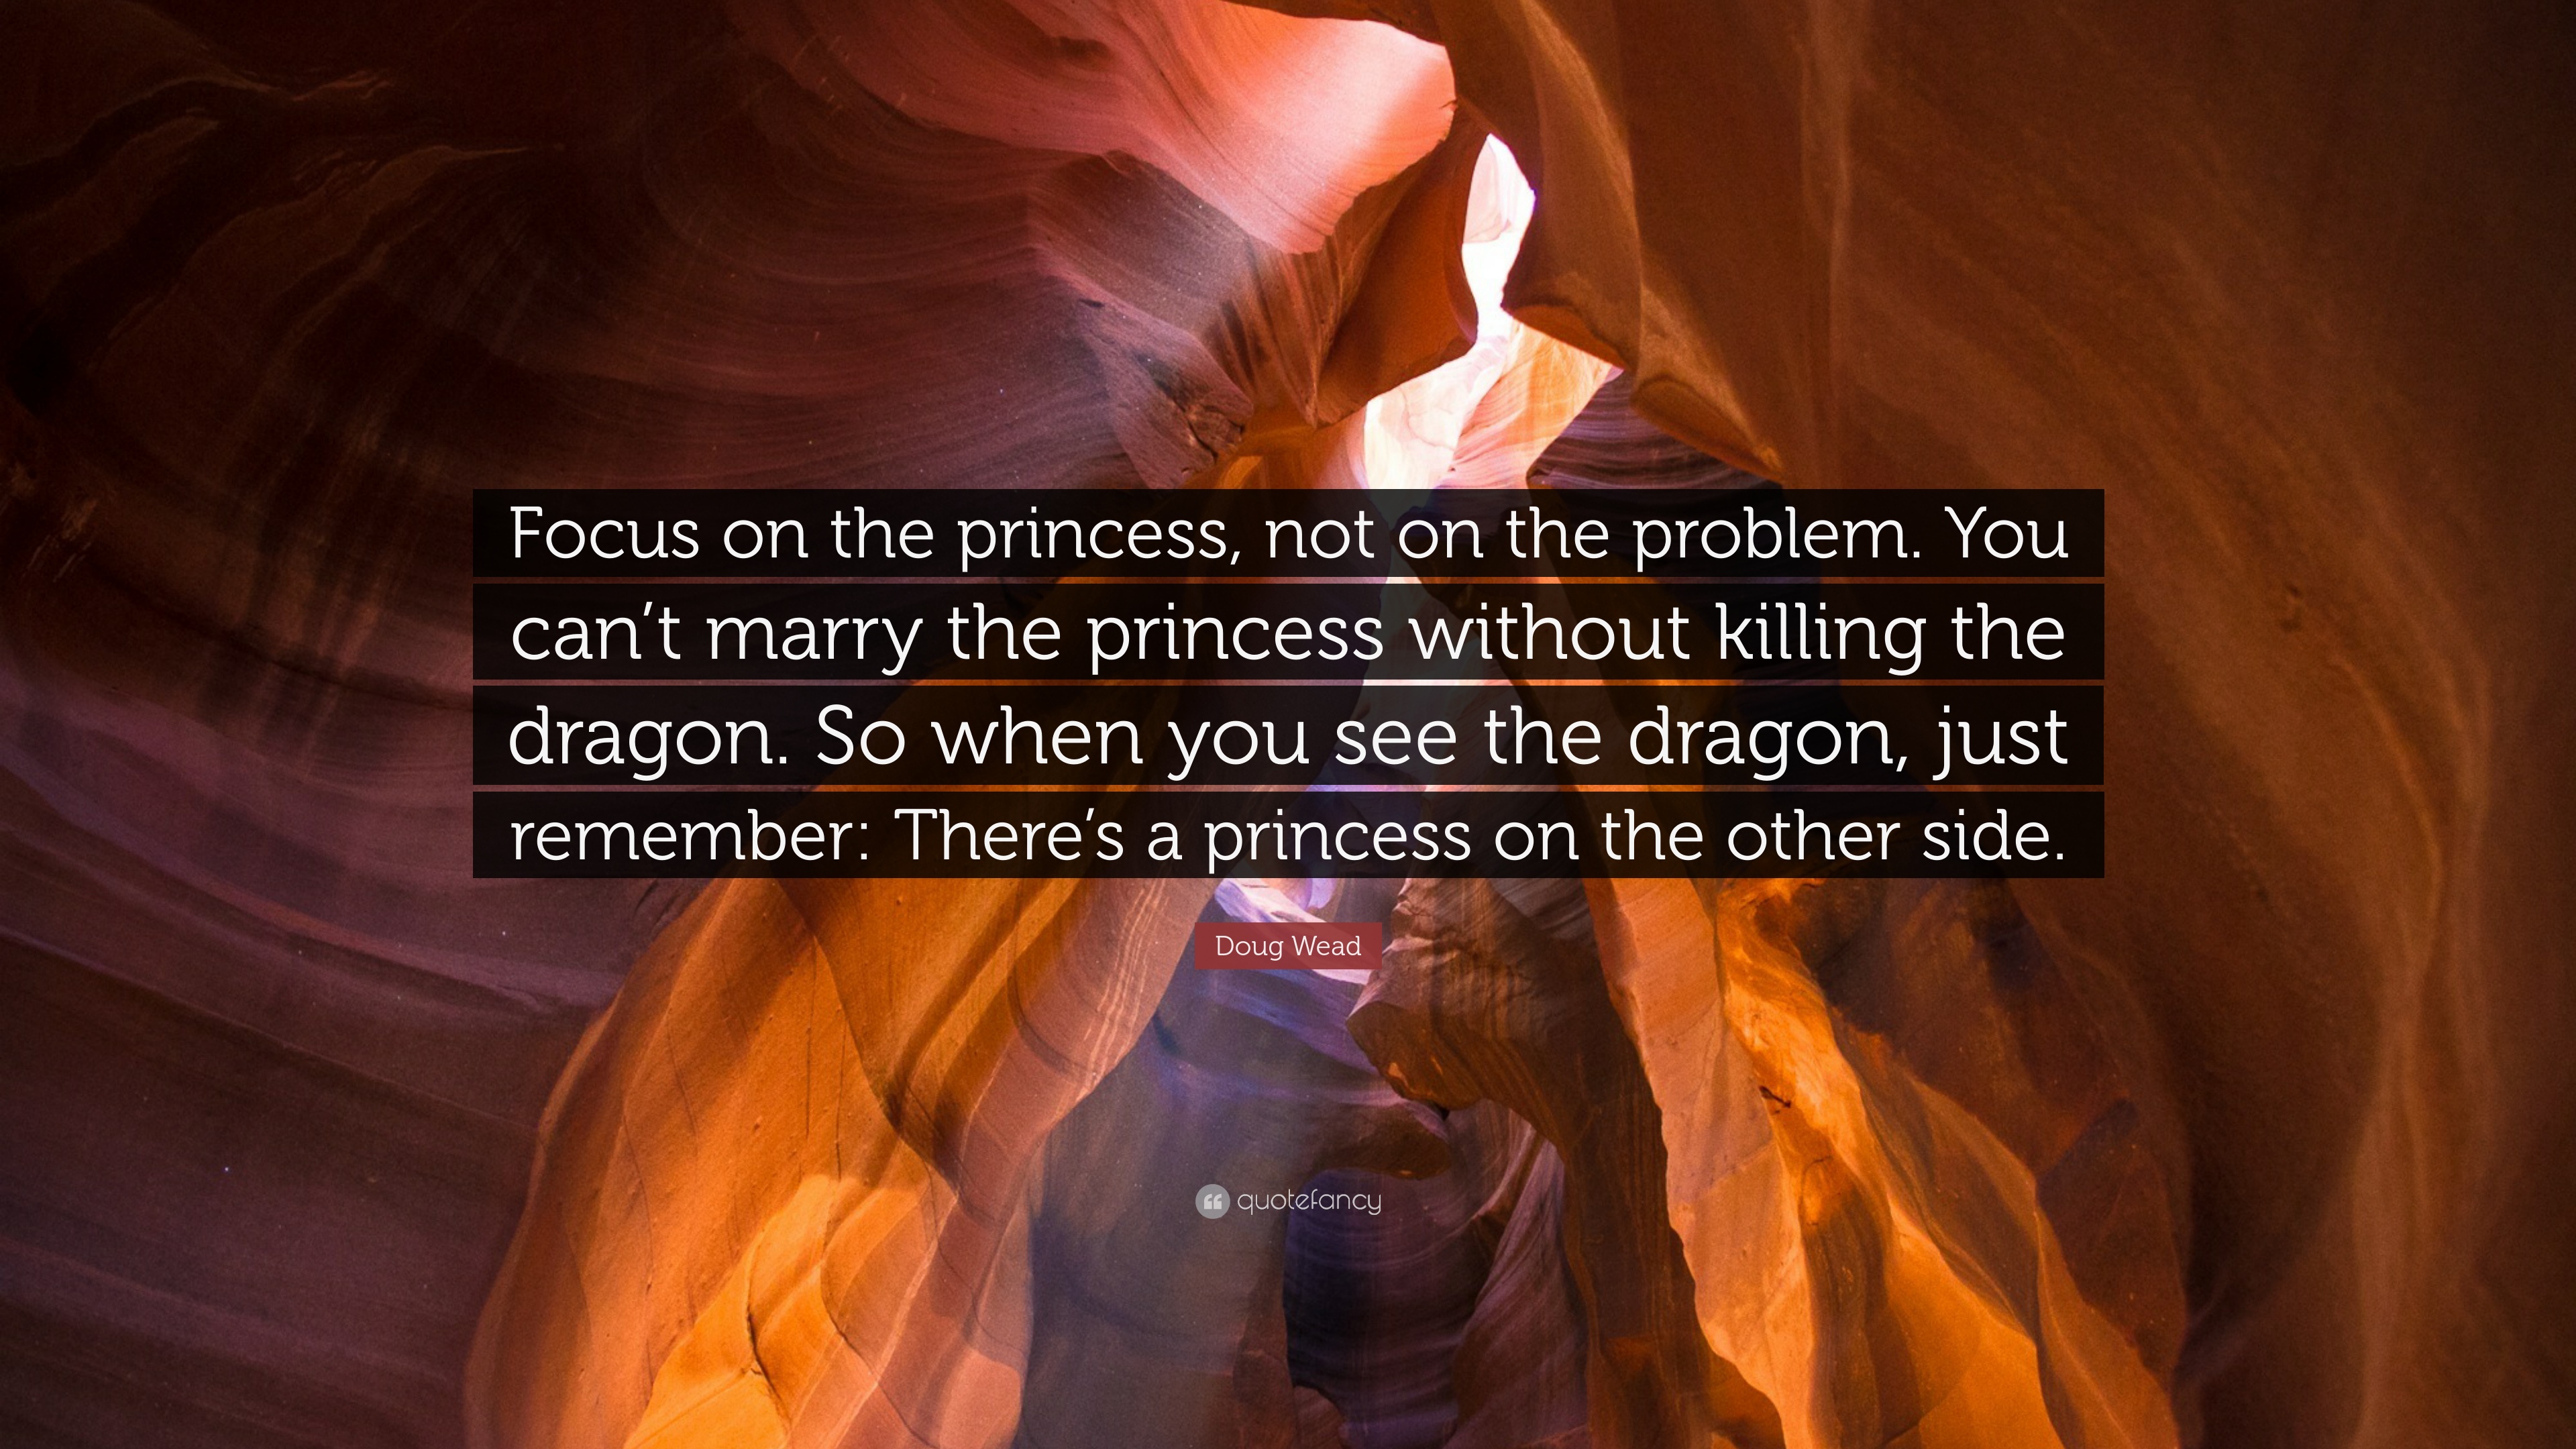 Doug Wead Quote: “Focus on the princess, not on the problem. You can